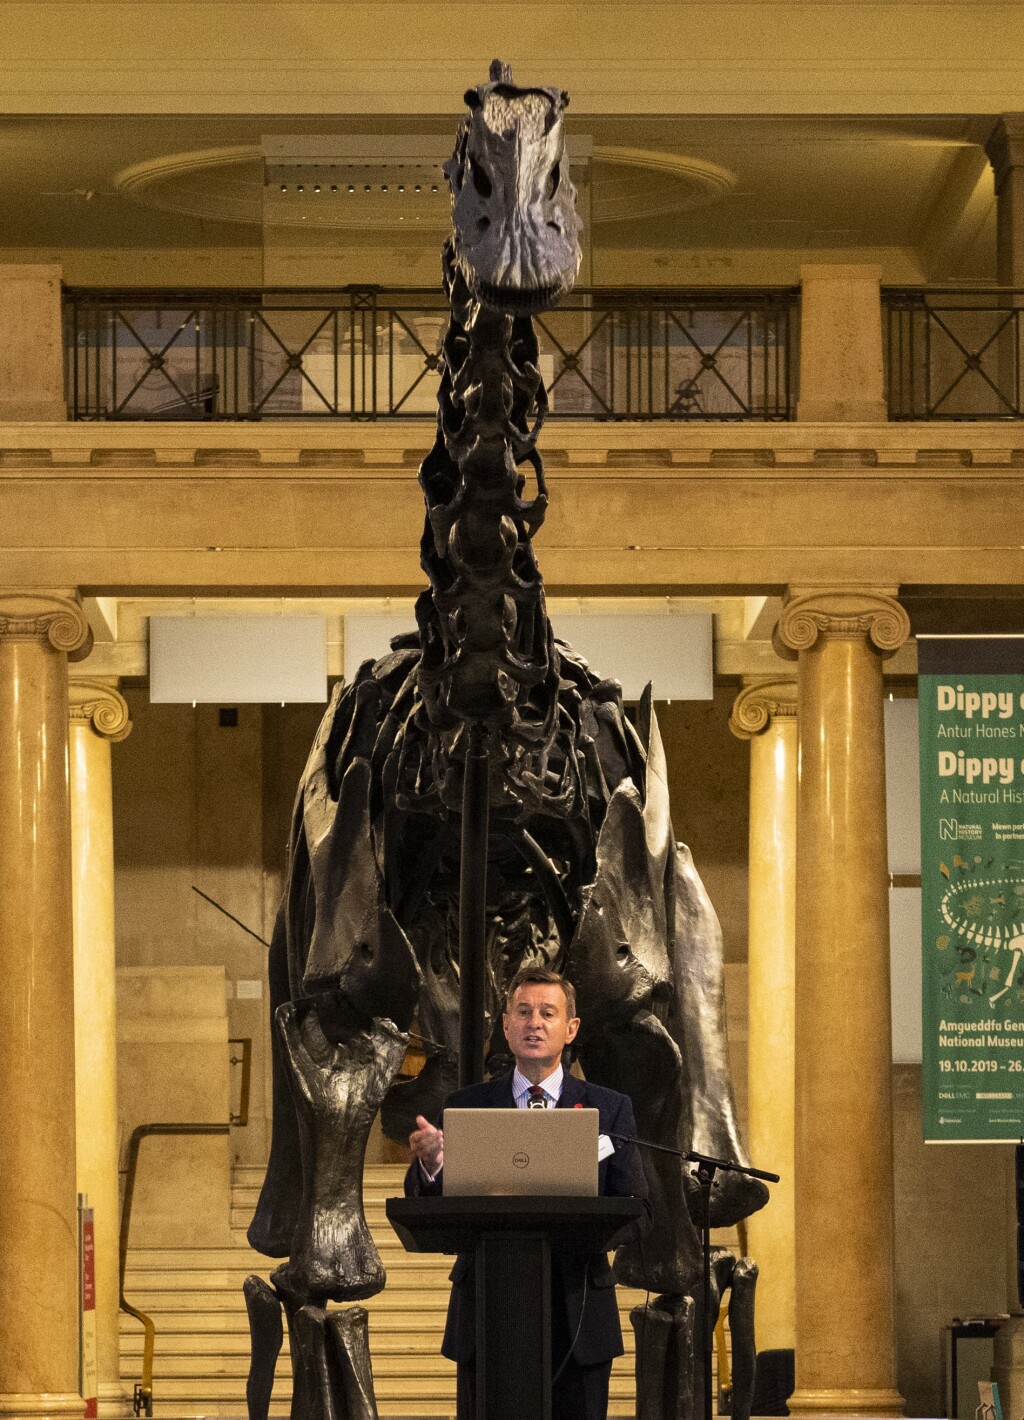 Breakfast Business Meeting Roger Lewis with Dippy